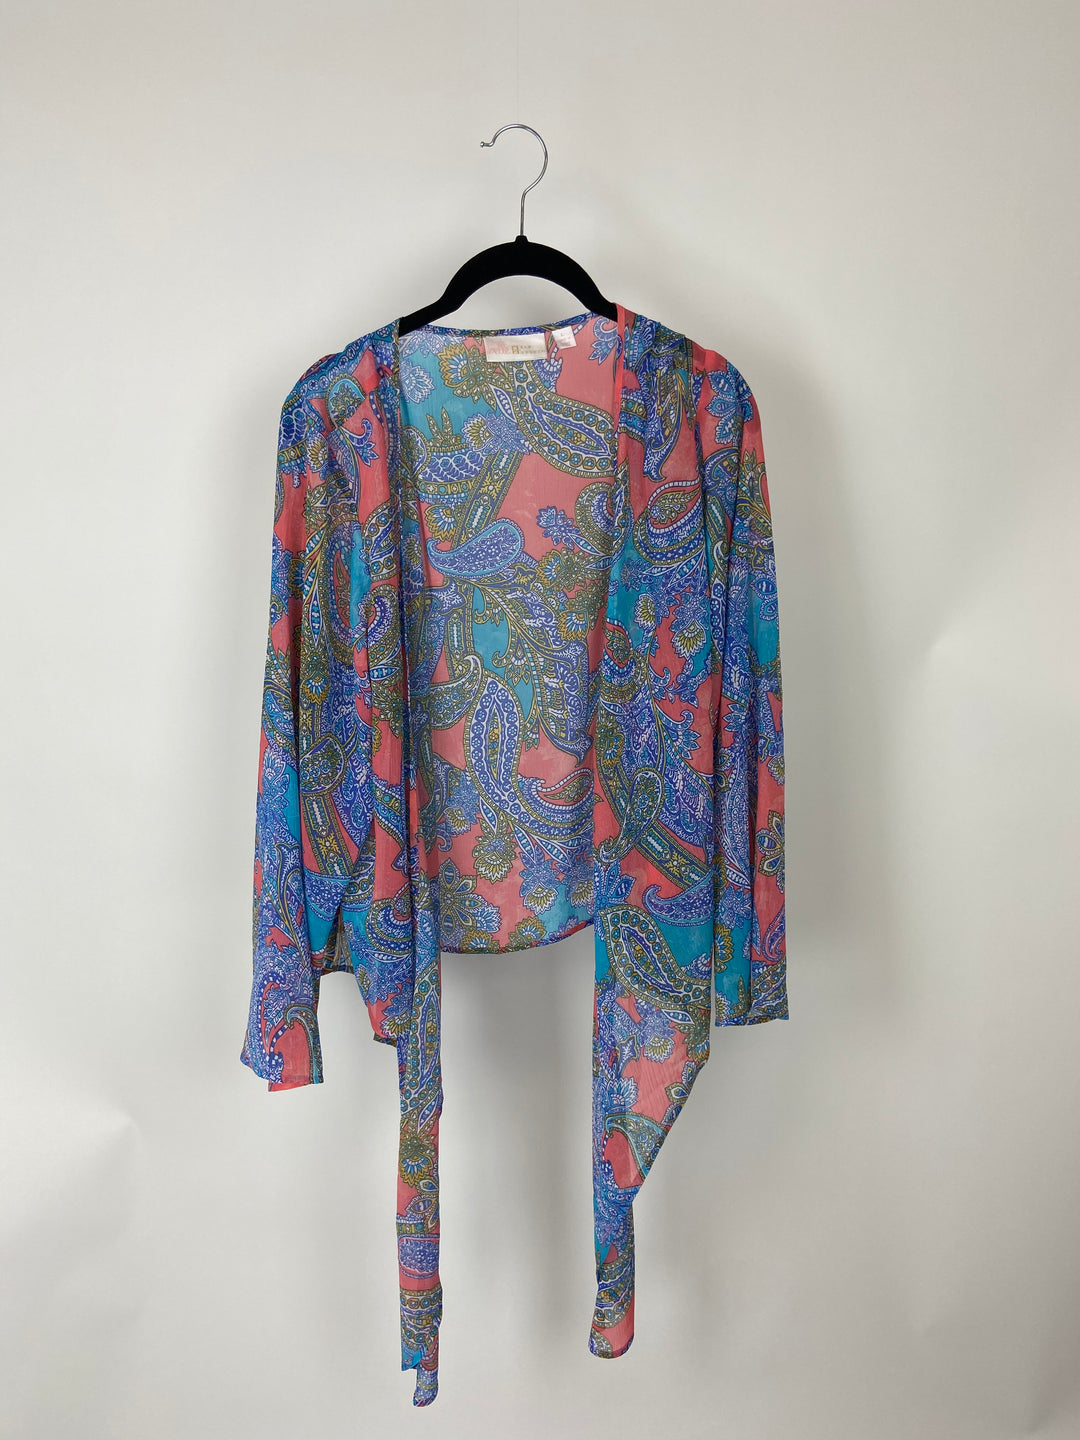 Multicolored Floral Print Sheer Cardigan- Large/Extra large